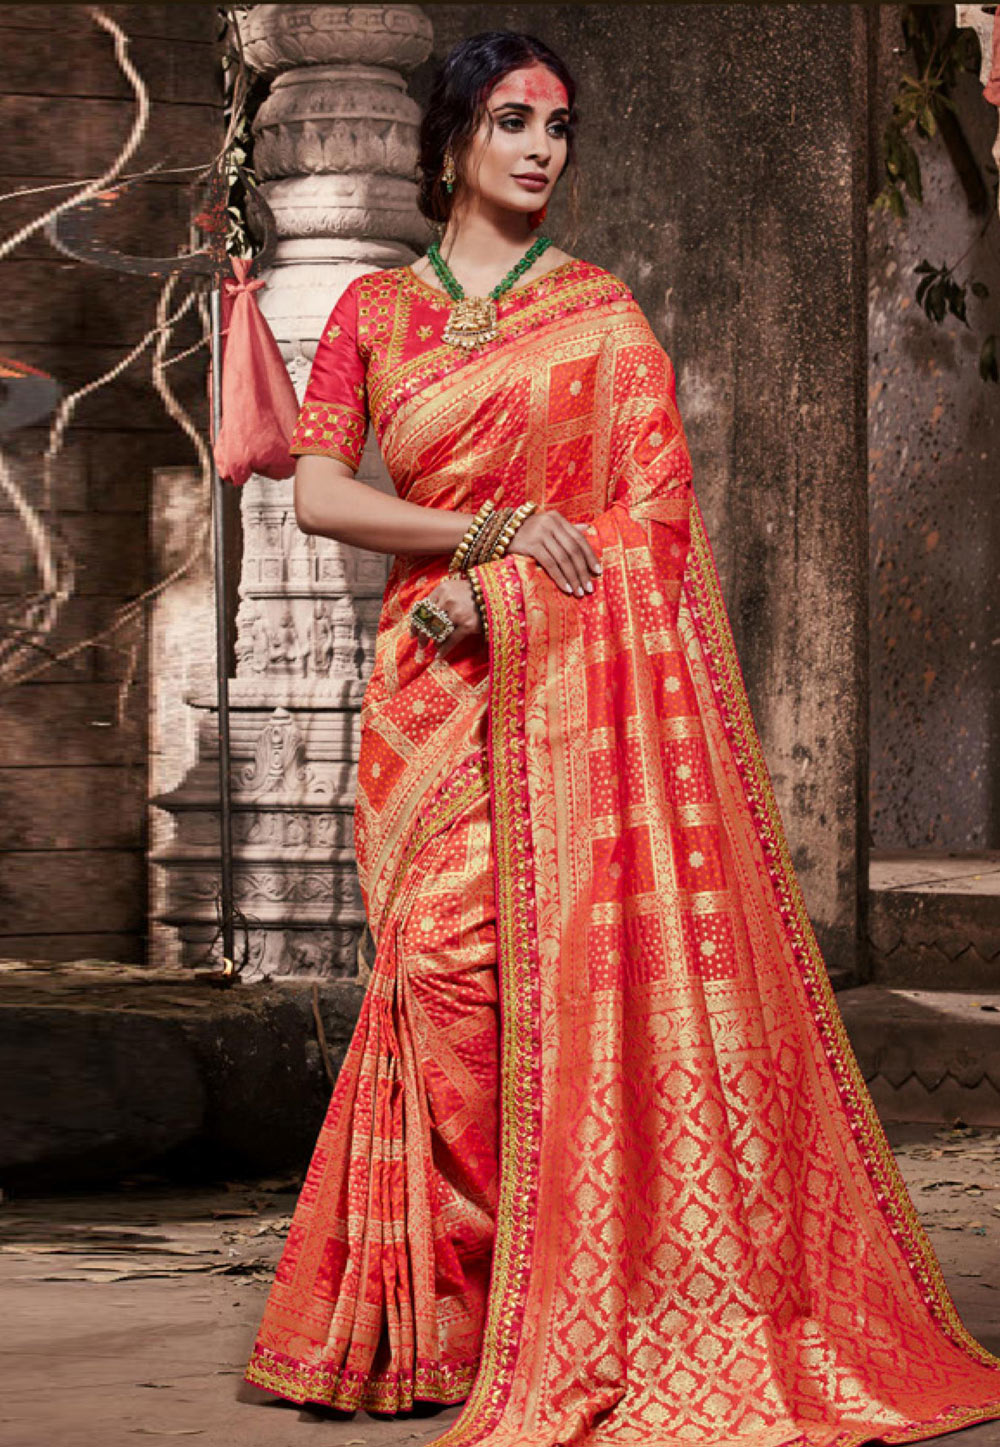 Presenting Enchanting Yet Breathable Organic Banarasi Sarees For Intimate  And Big Fat Indian Weddings, That Are Light On Your Skin And Uplift Your  Wedding Shenanigans!